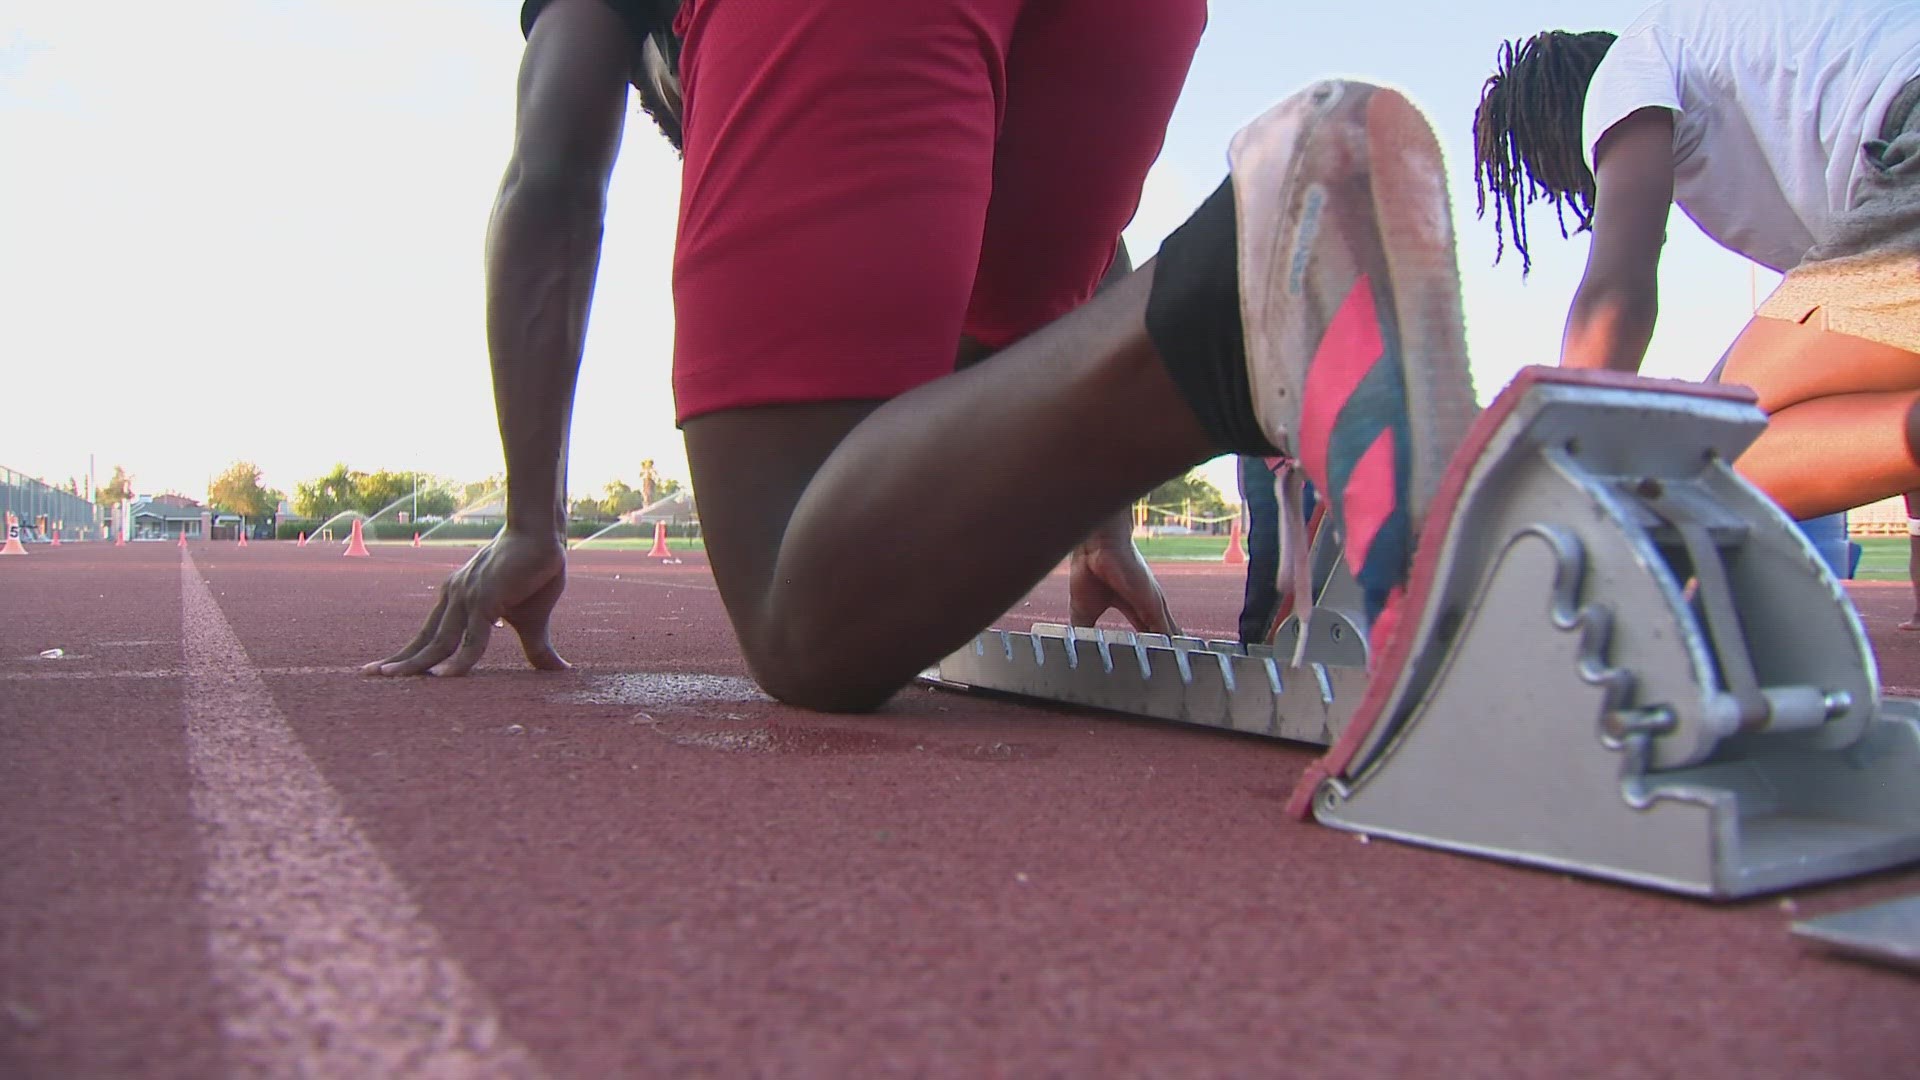 Meet the Chandler teen set to compete at one of track and field’s premier venues.